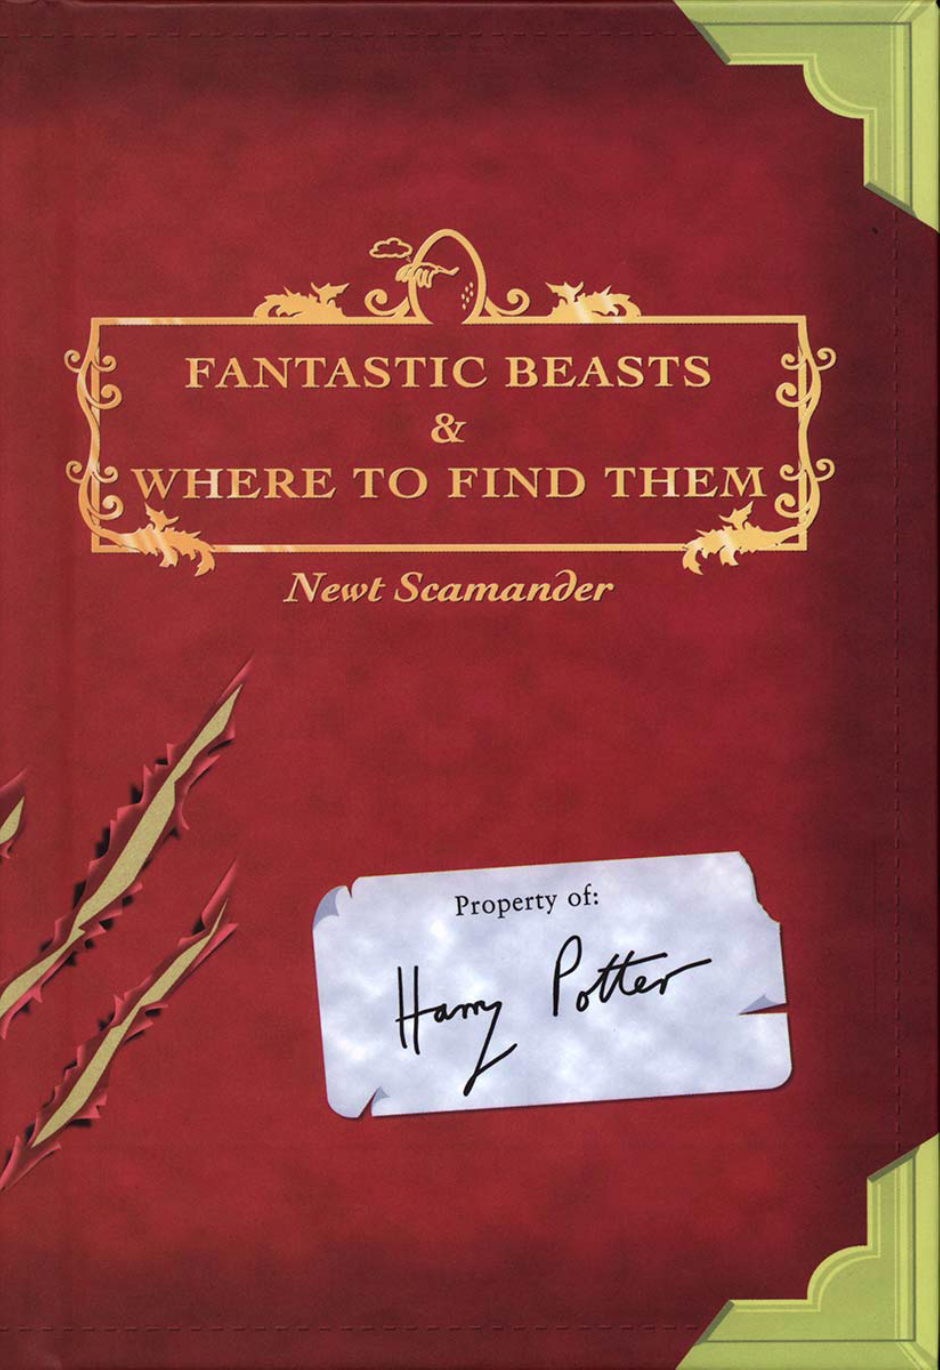 Watch Film Online Fantastic Beasts And Where To Find Them 1080P